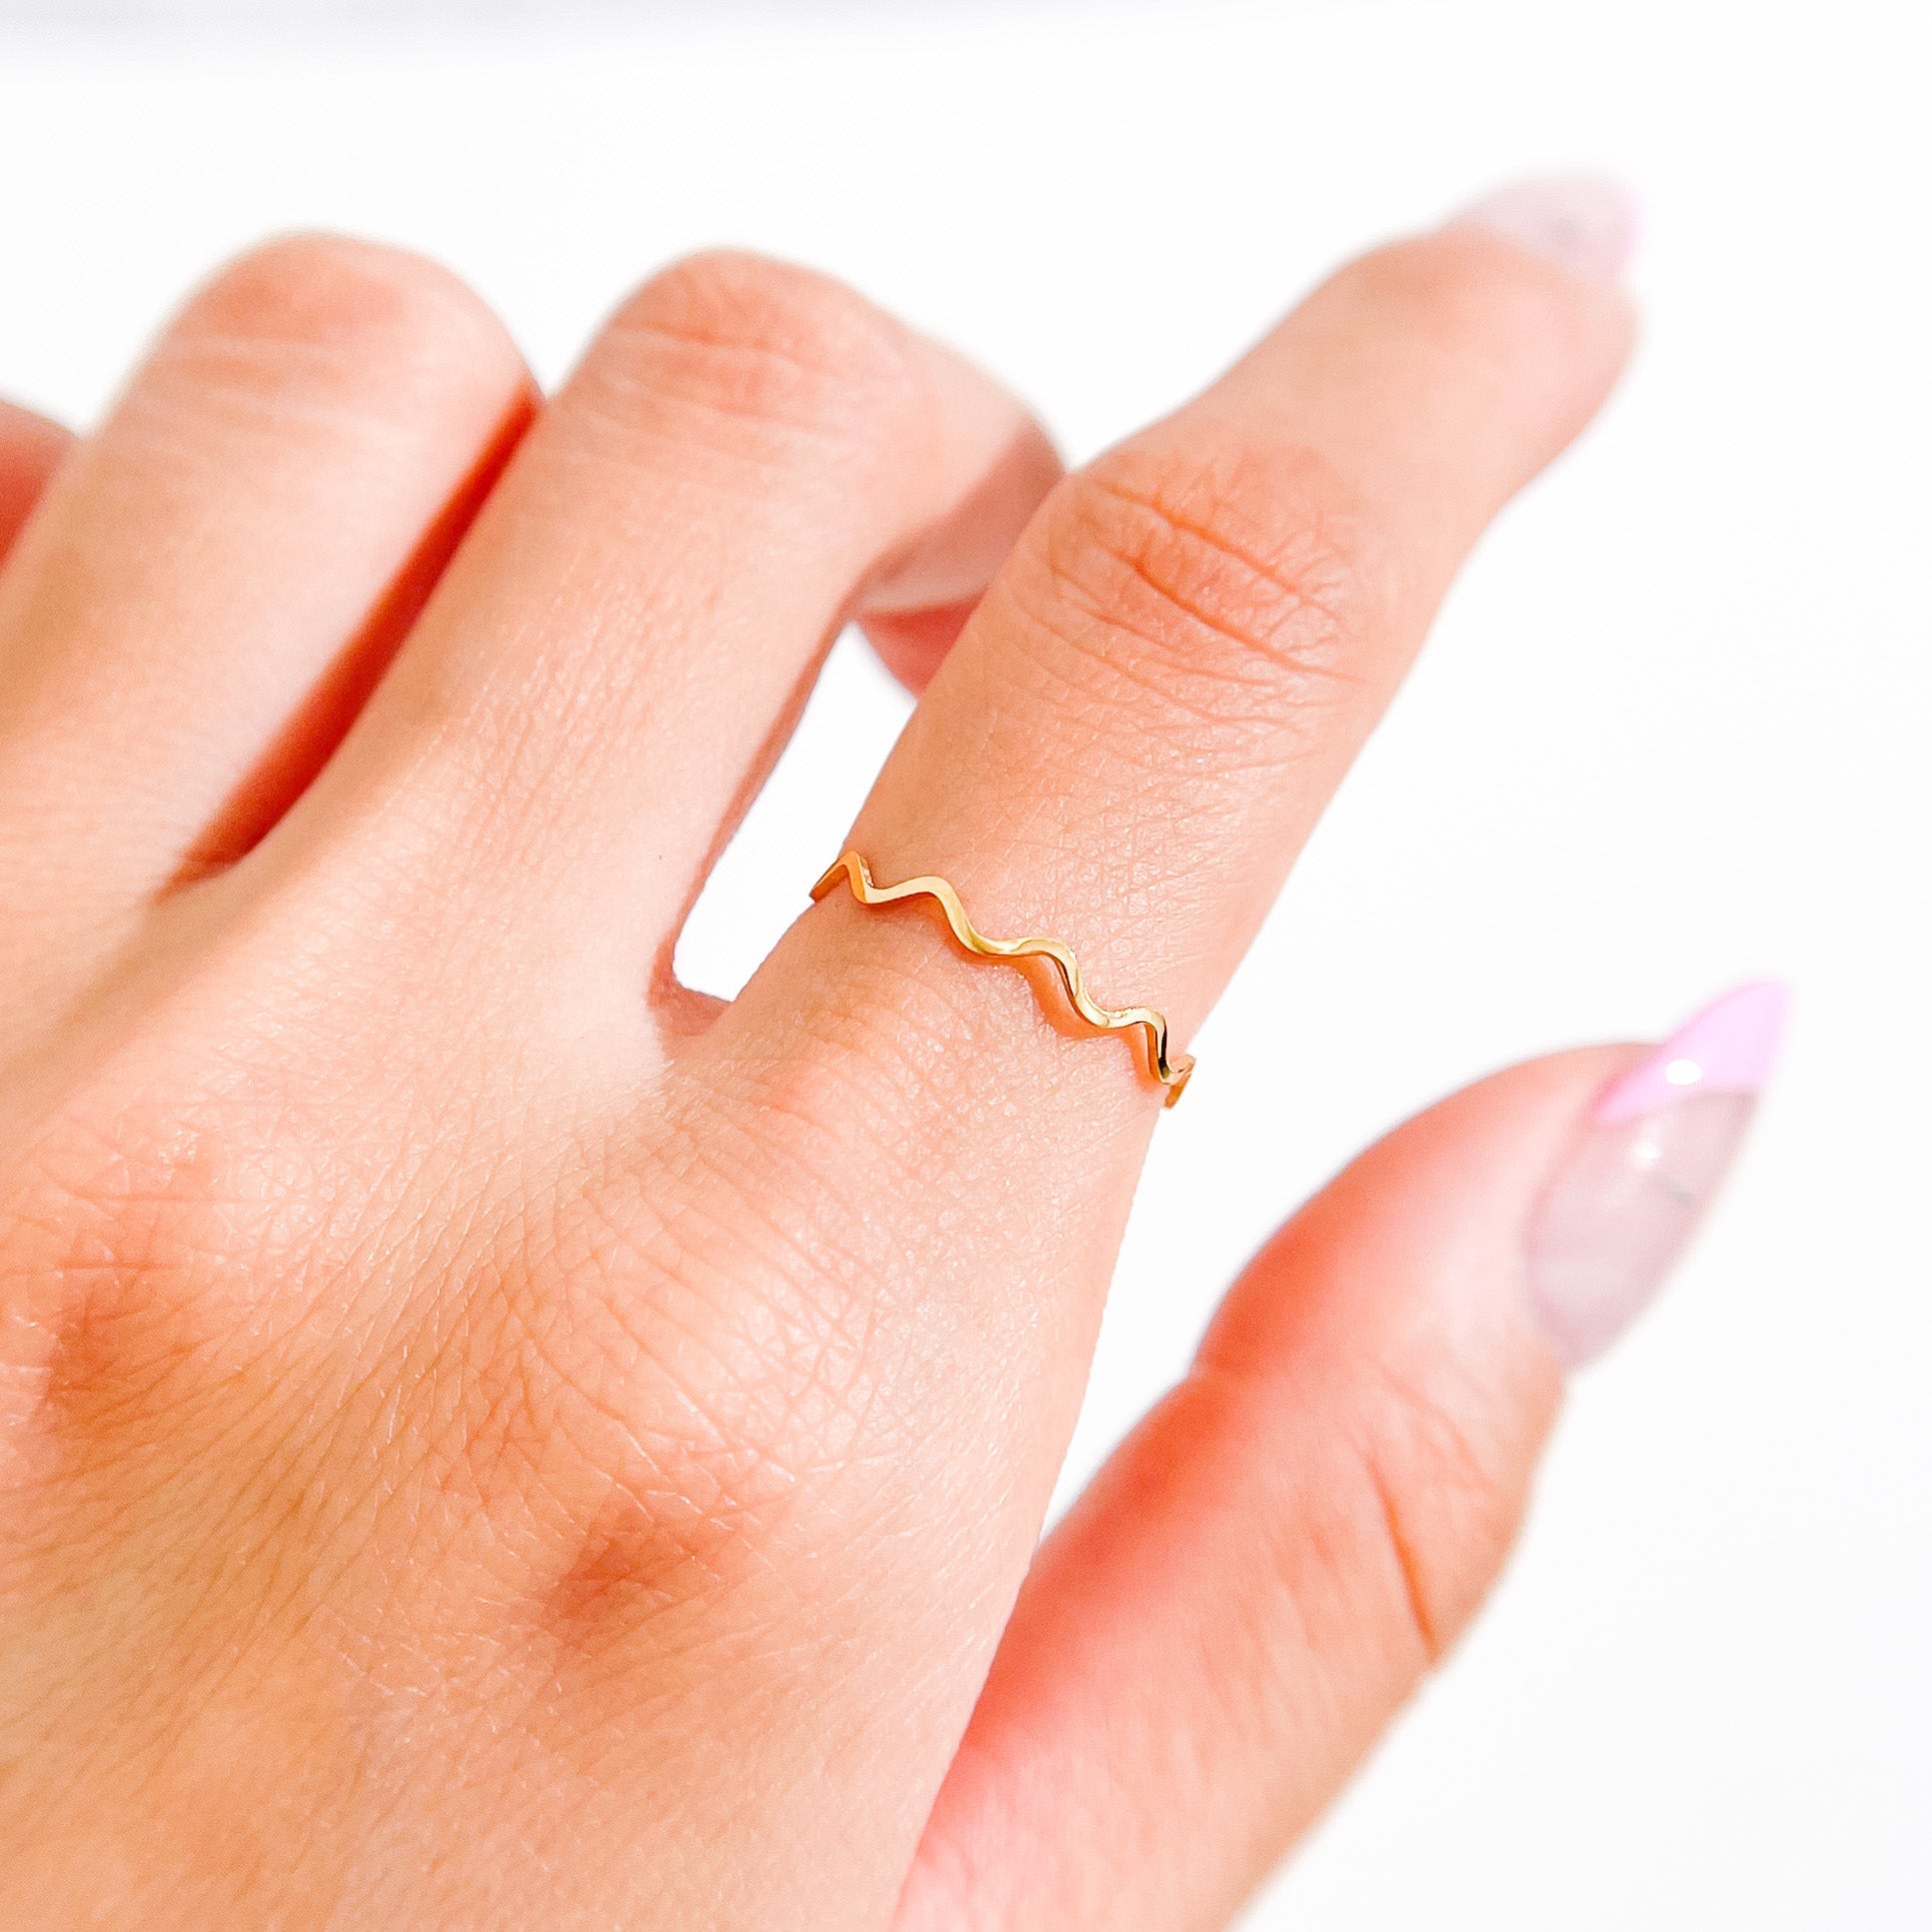 Wavy Stacking Ring in Gold - Flaire & Co.